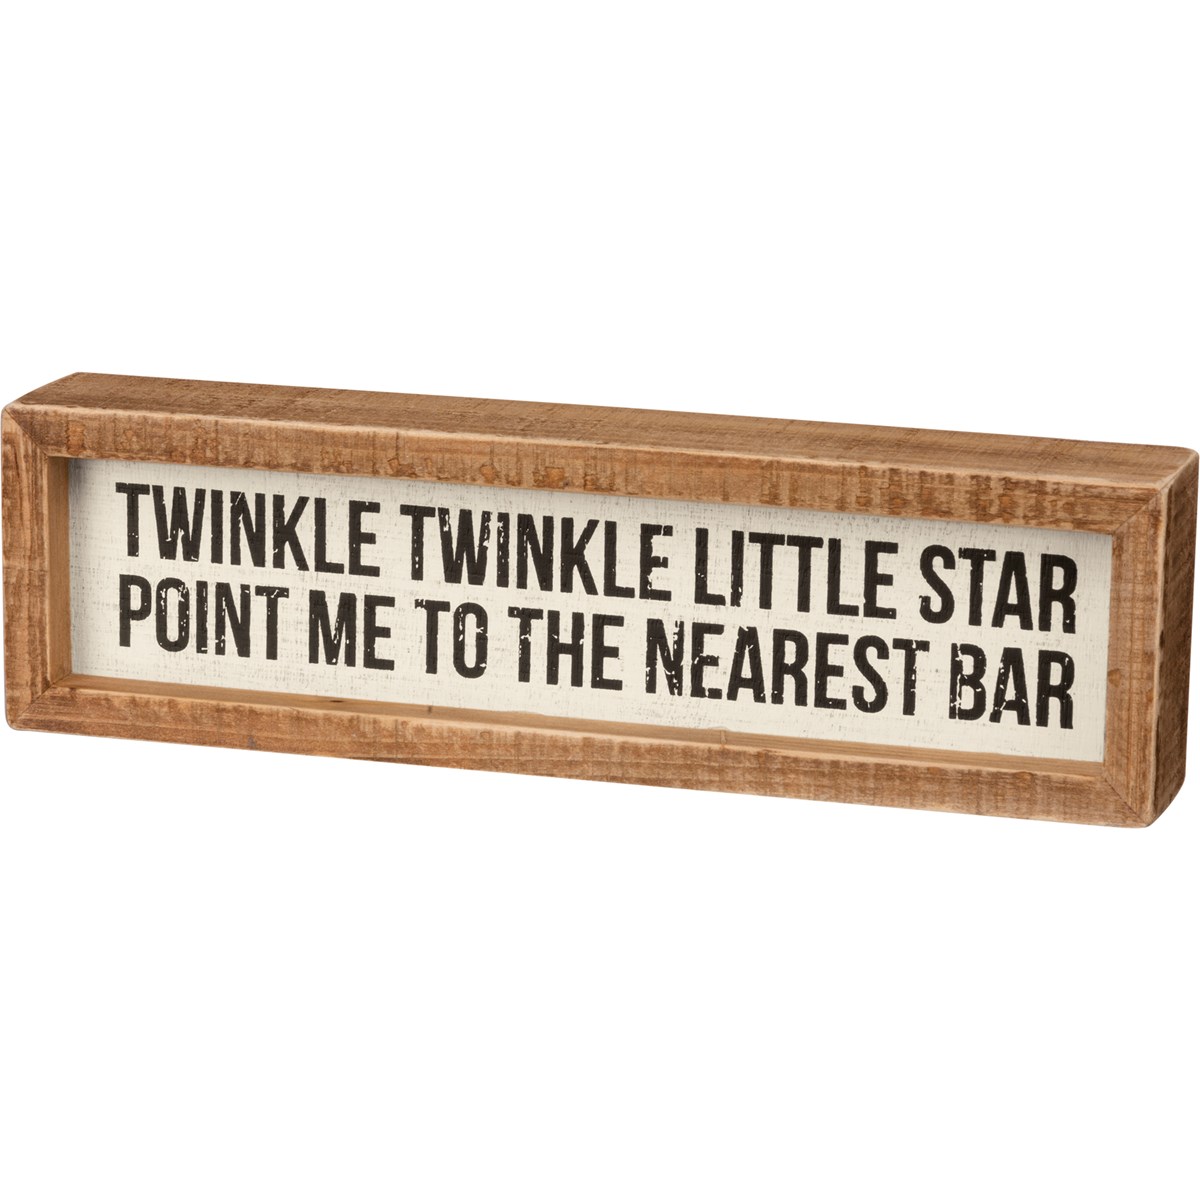 Point Me To The Nearest Bar Inset Box Sign - Wood